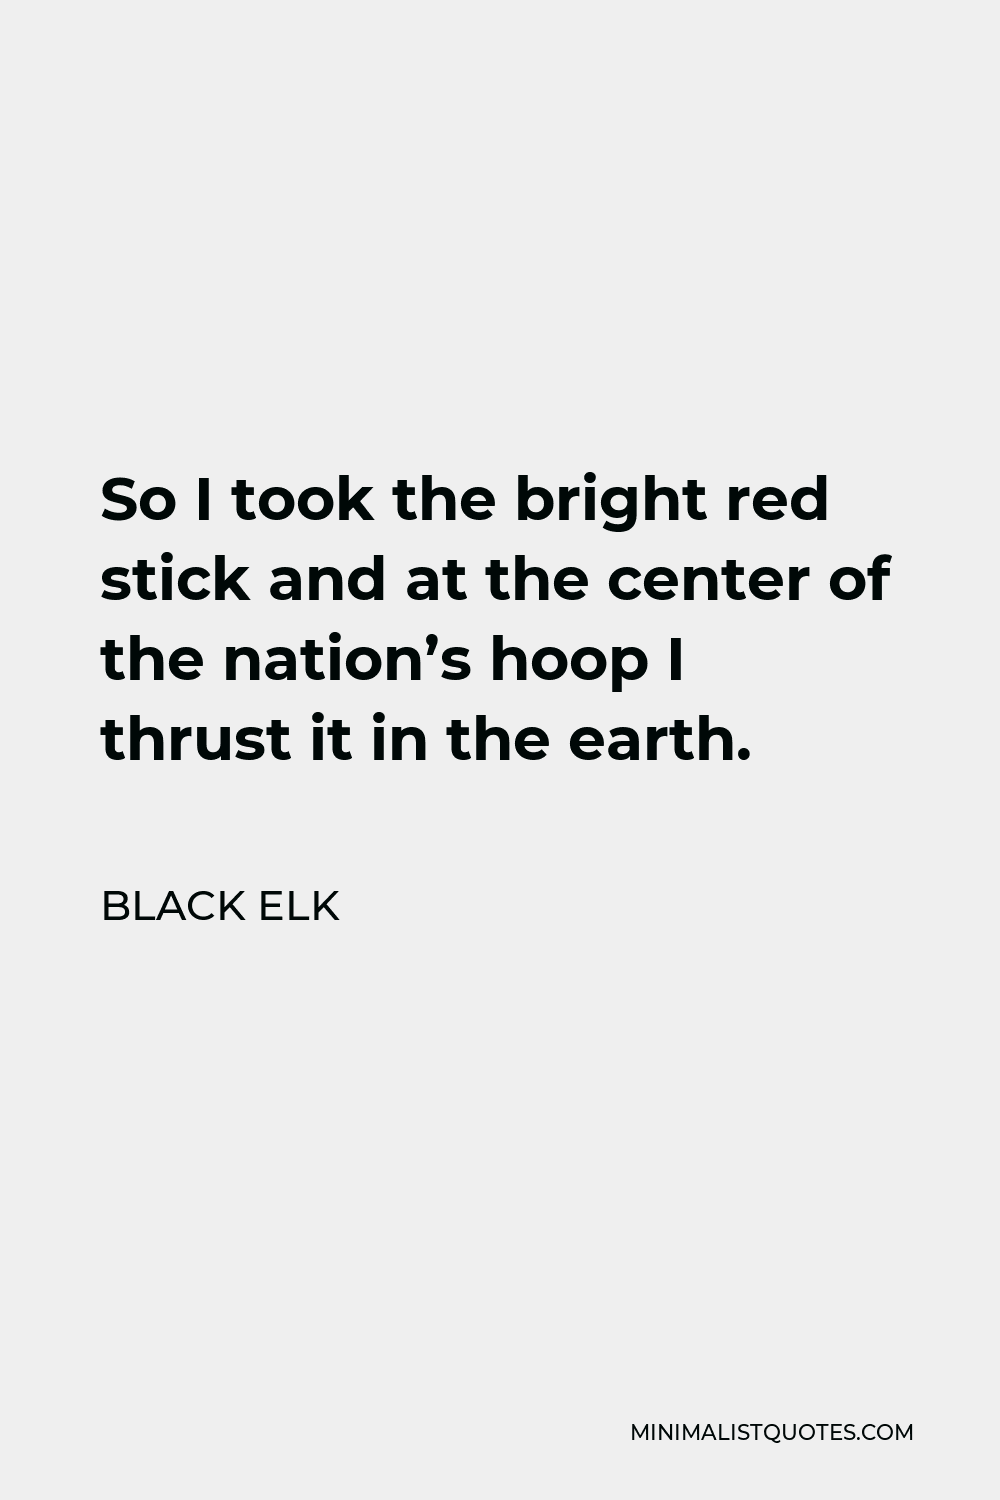 Black Elk Quote - So I took the bright red stick and at the center of the nation’s hoop I thrust it in the earth.